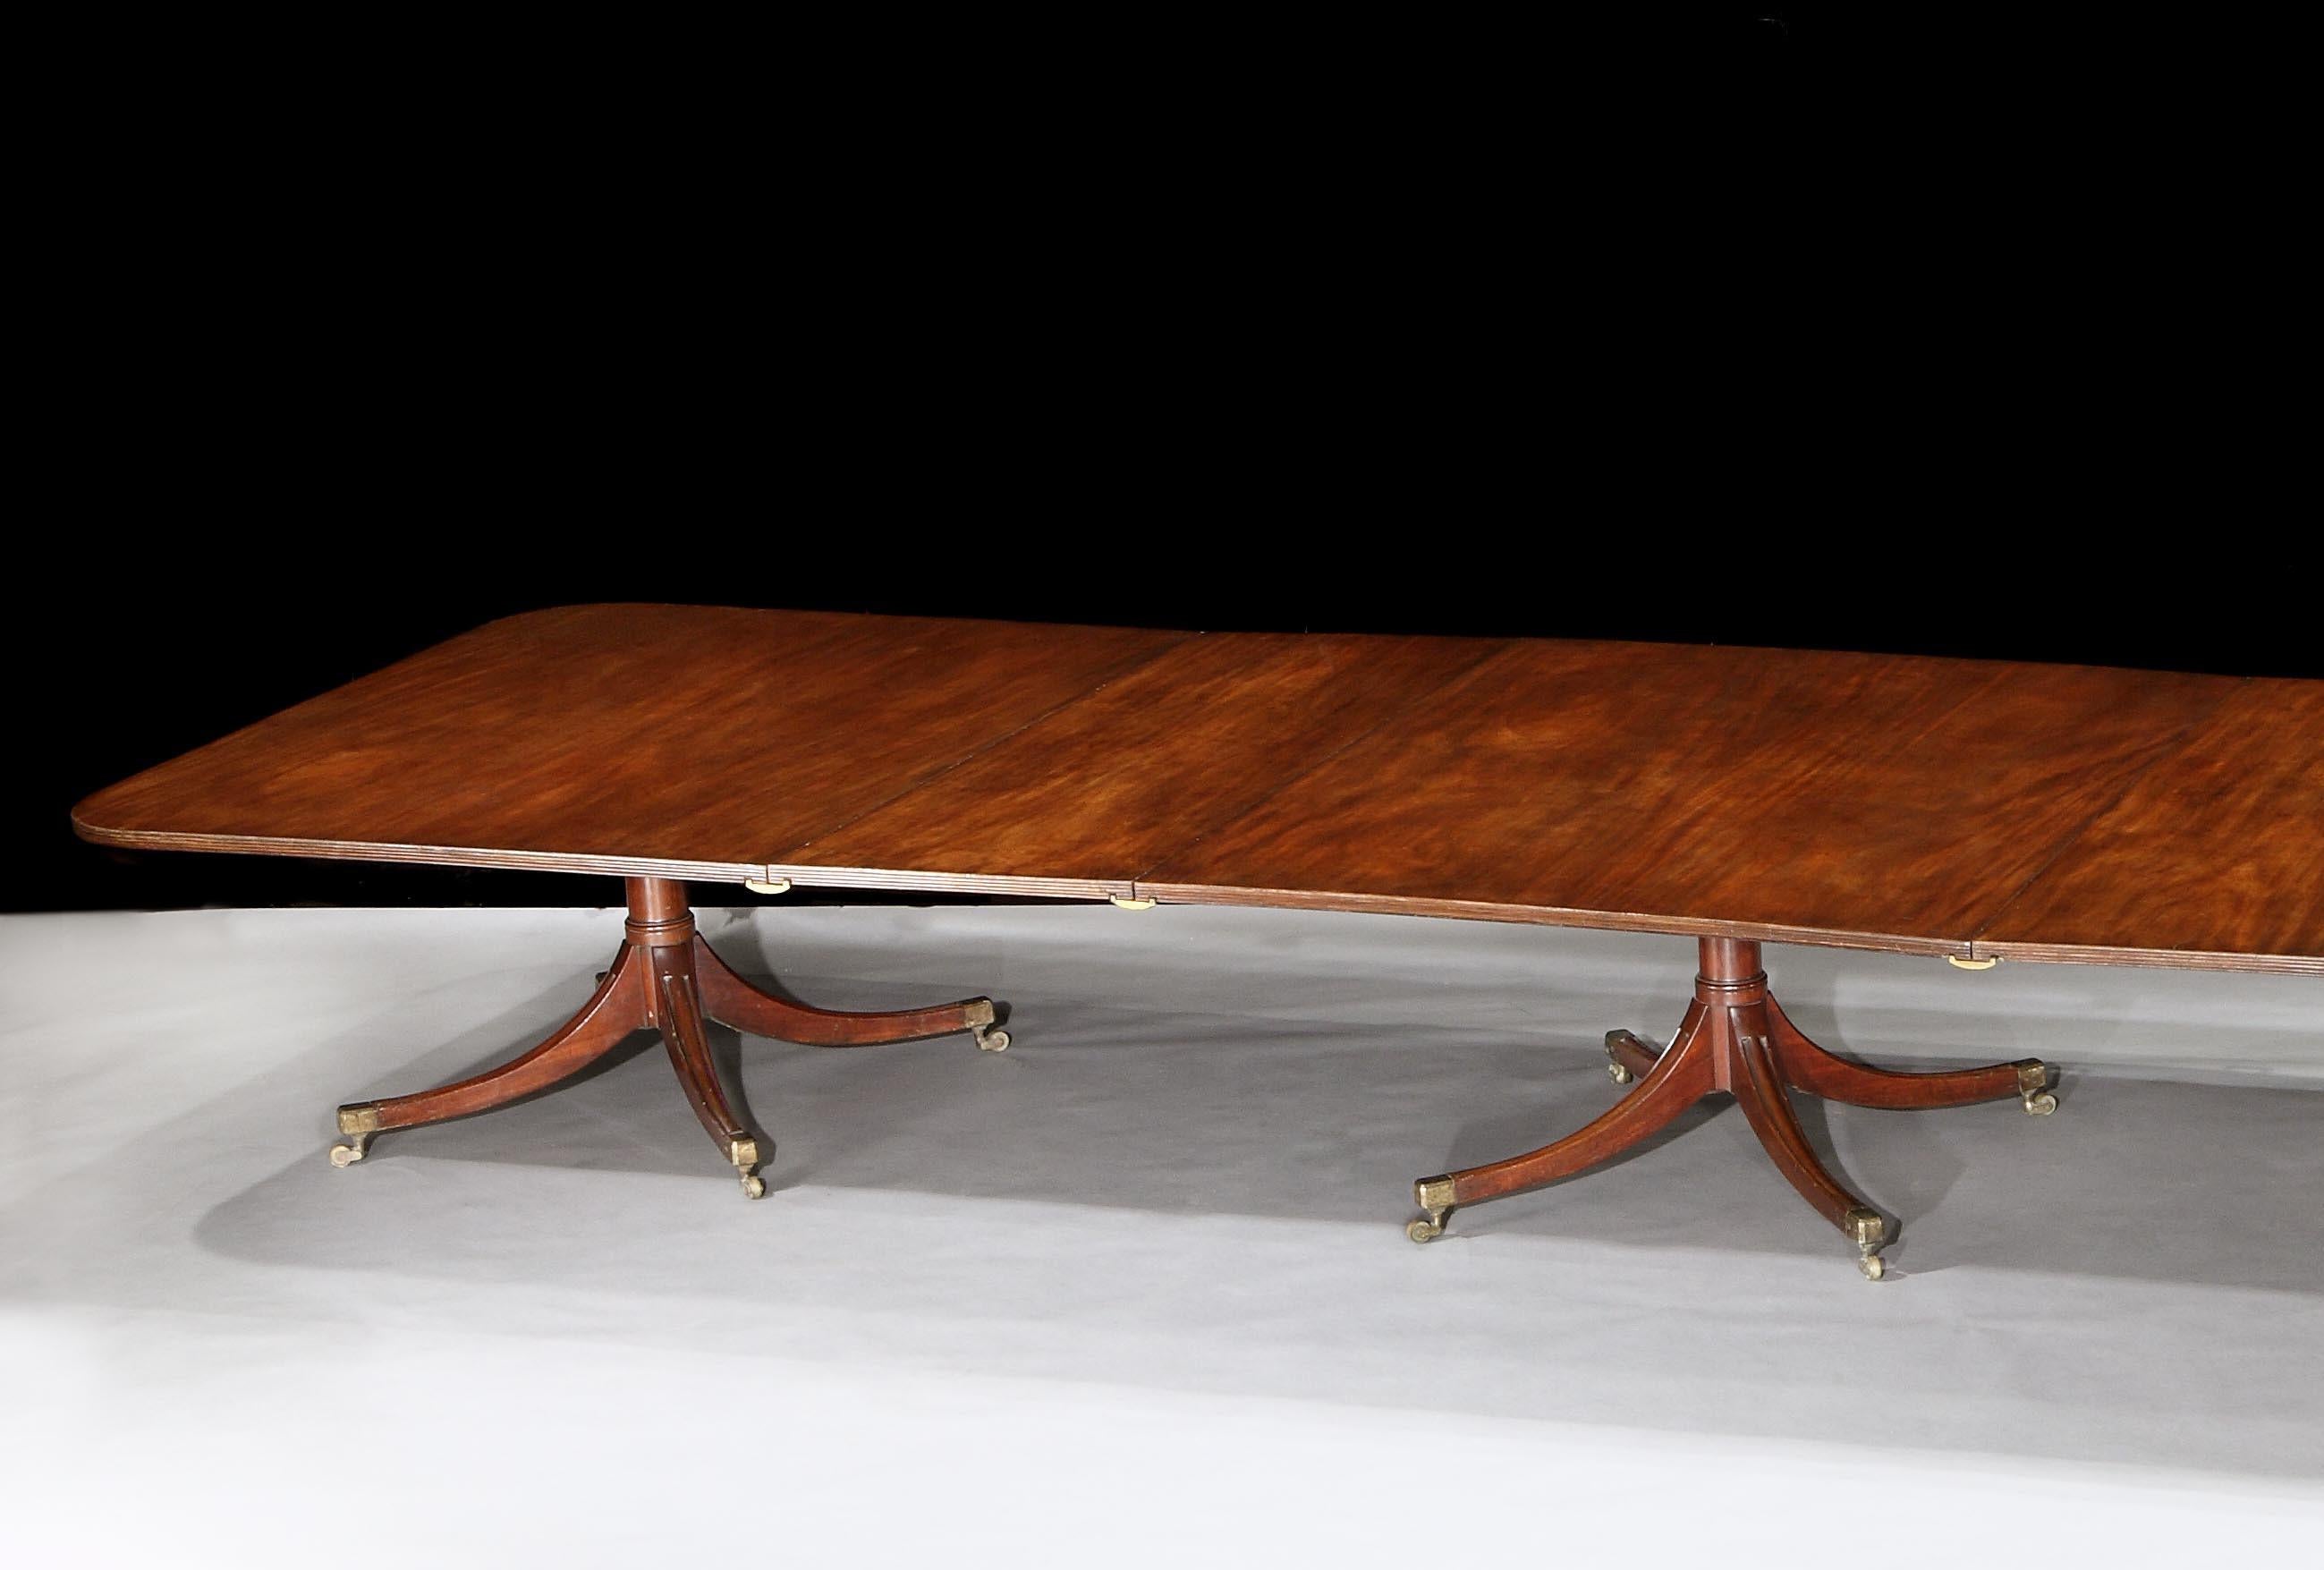 A fabulous George III mahogany four pedestal dining table, the superbly figured mahogany rectangular tops, with a reeded edge and three extra leaves, resting on four shot of turned gun barrel pedestals with brass box casters.